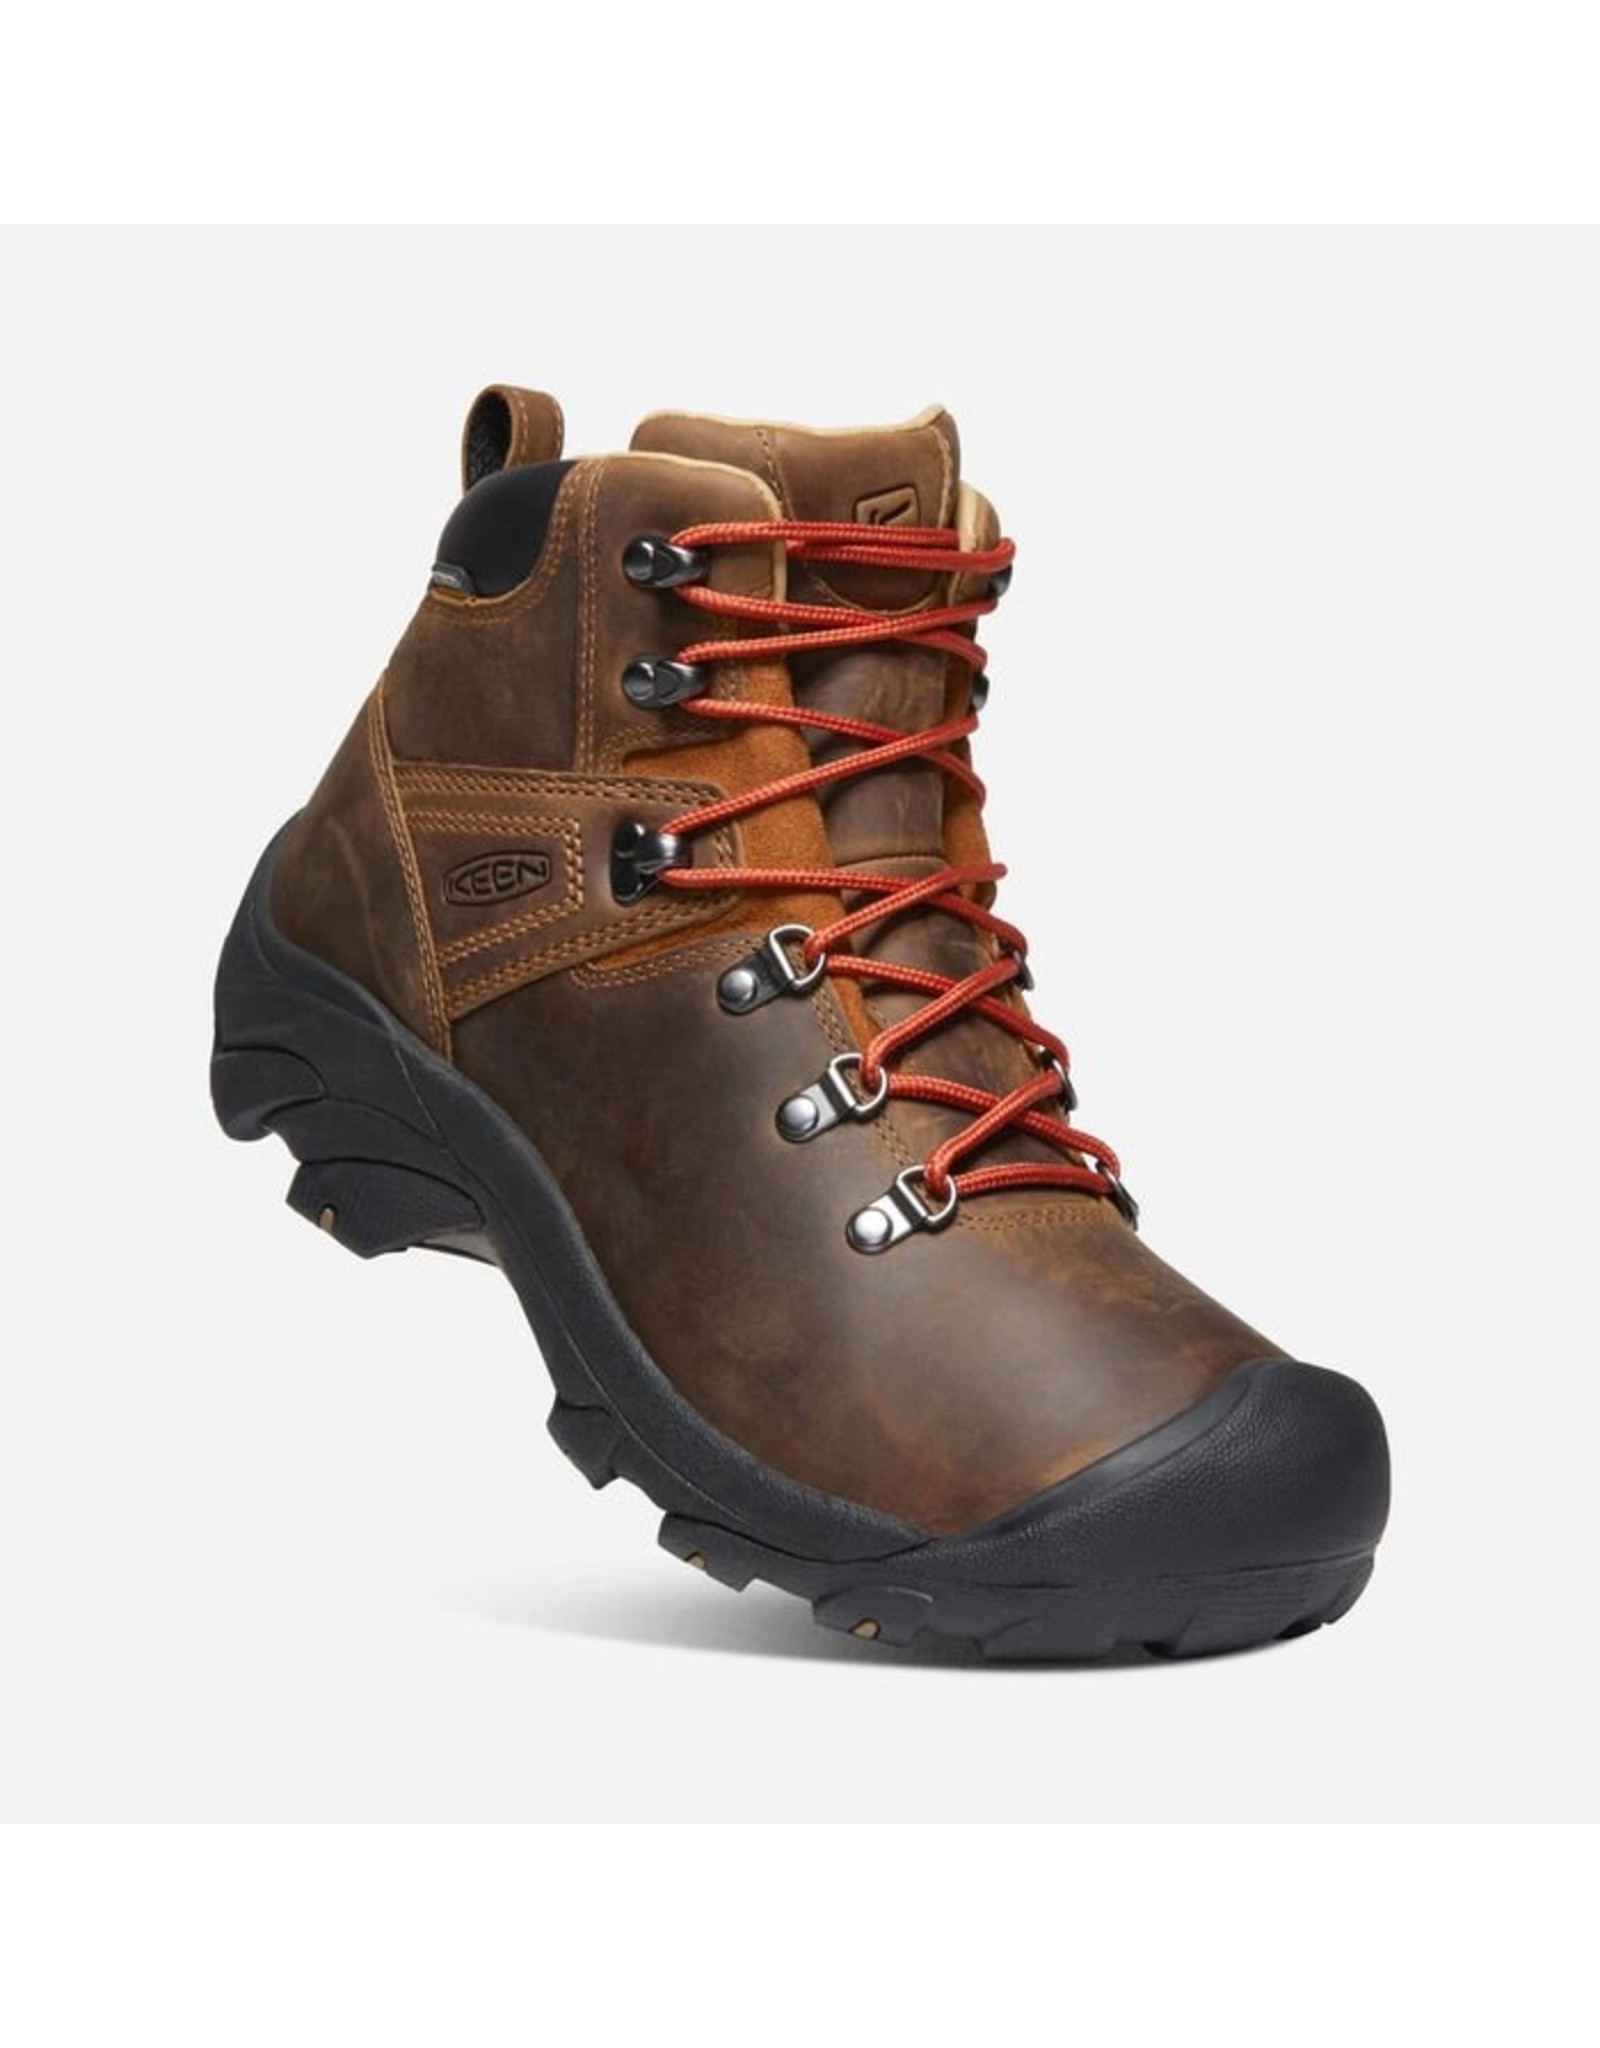 KEEN MEN'S PYRENEES BOOT-SYRUP